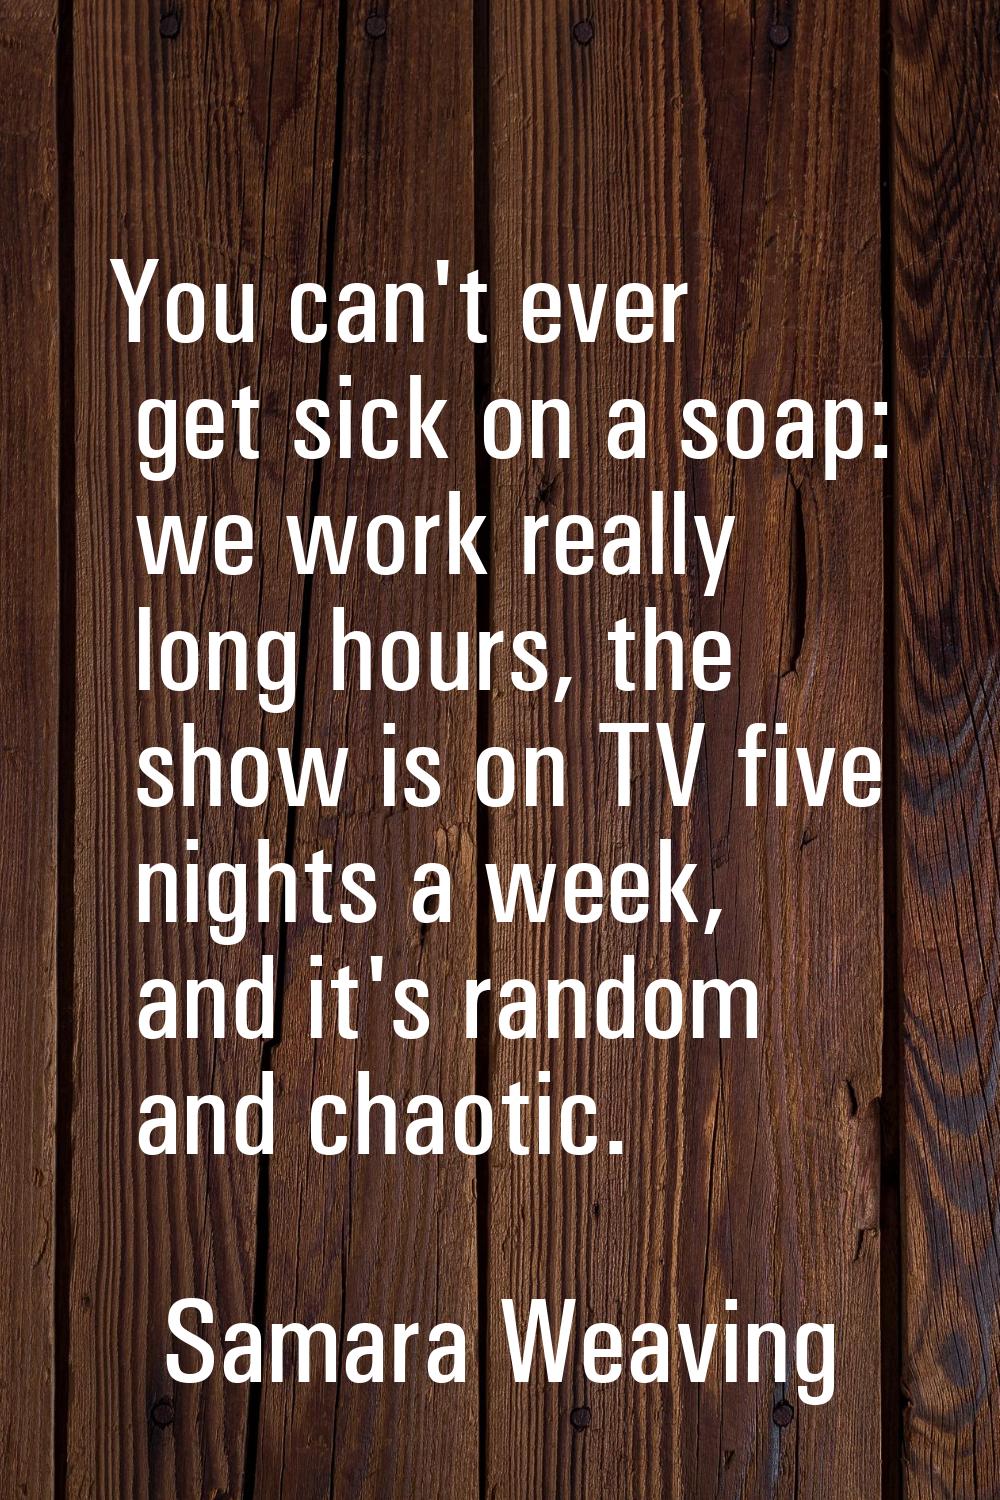 You can't ever get sick on a soap: we work really long hours, the show is on TV five nights a week,